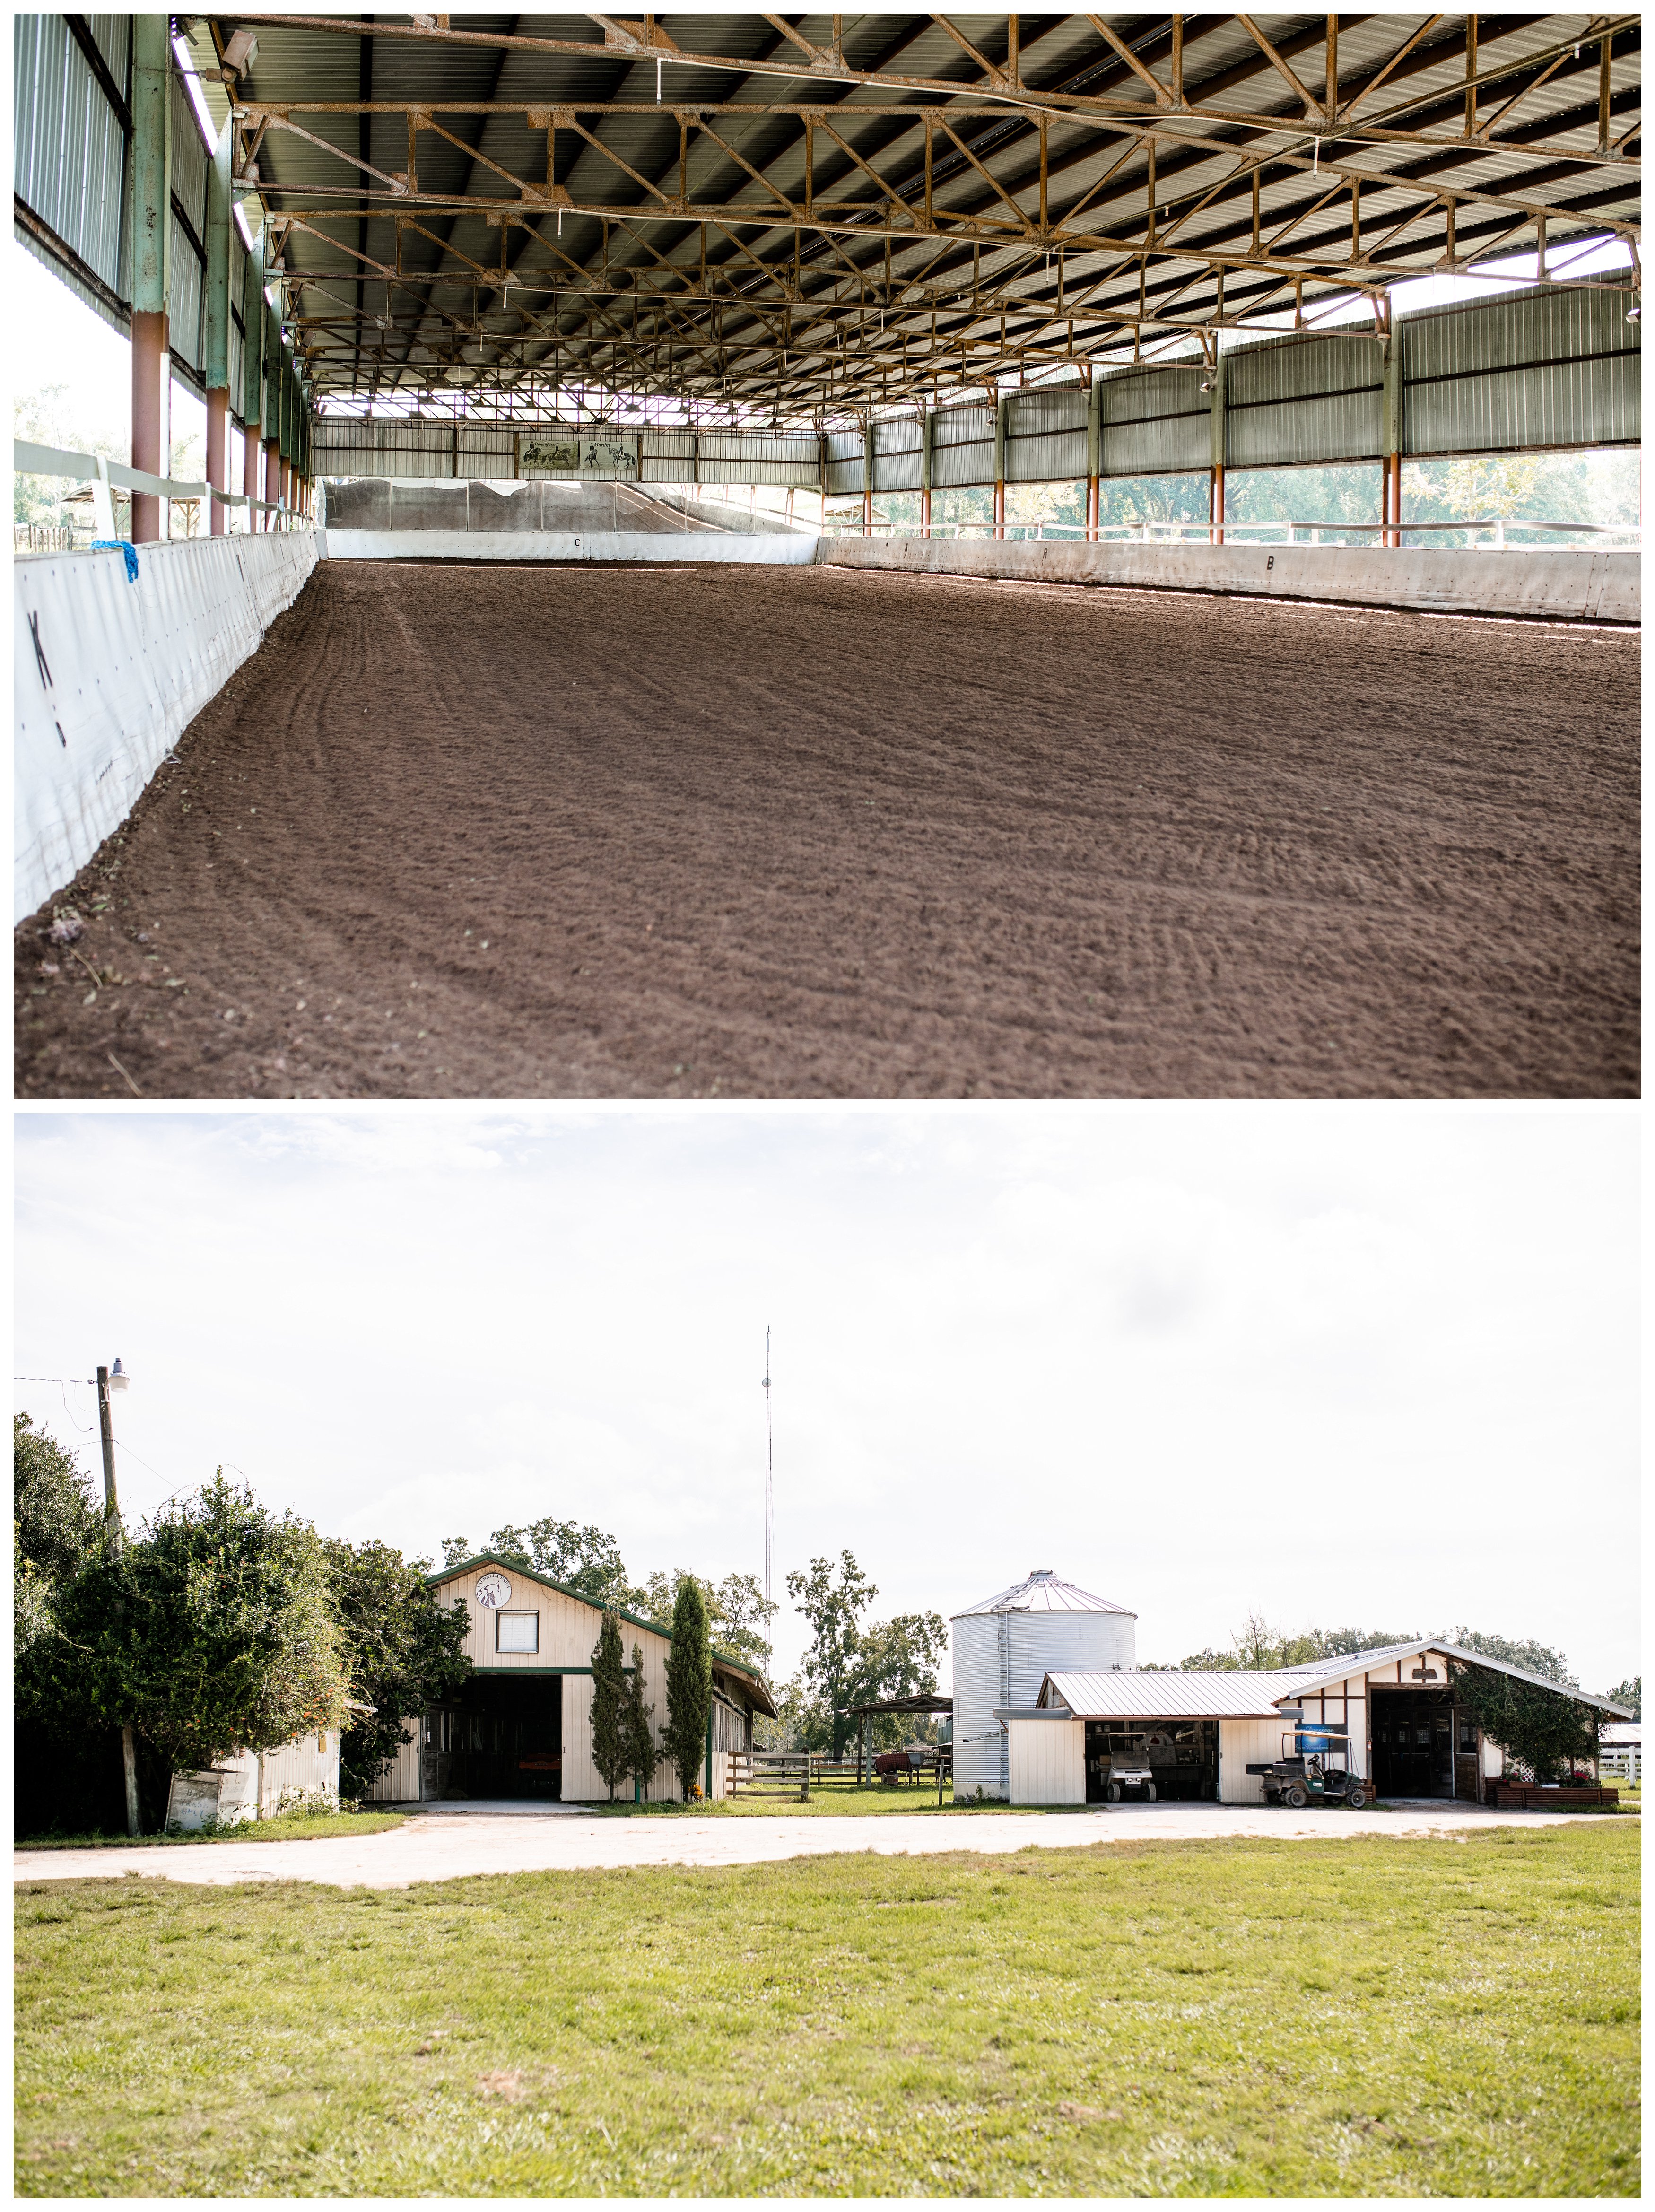 Dressage horse barn in Wellborn, FL offers Trakehners for sale, training, and breeding.